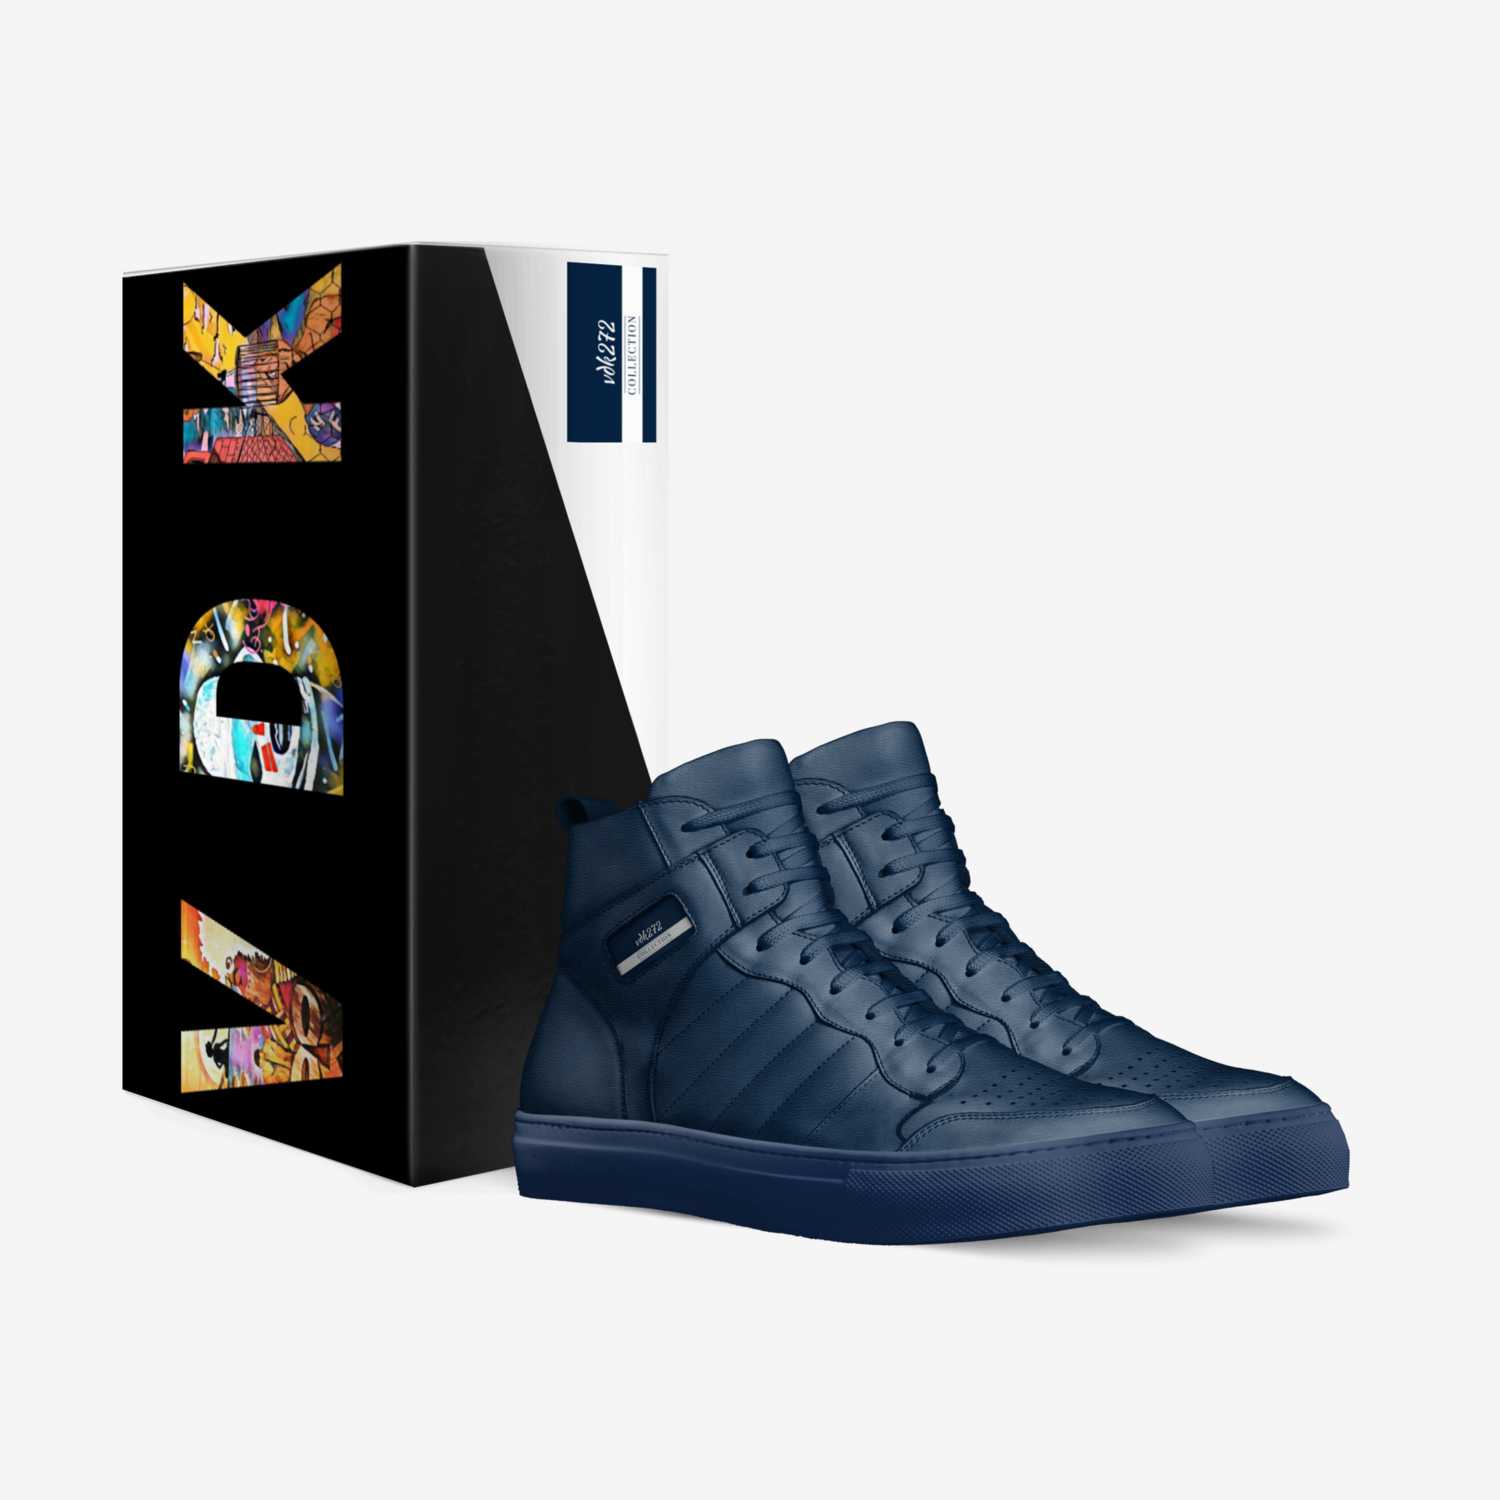 vdk272 custom made in Italy shoes by Cyron James | Box view